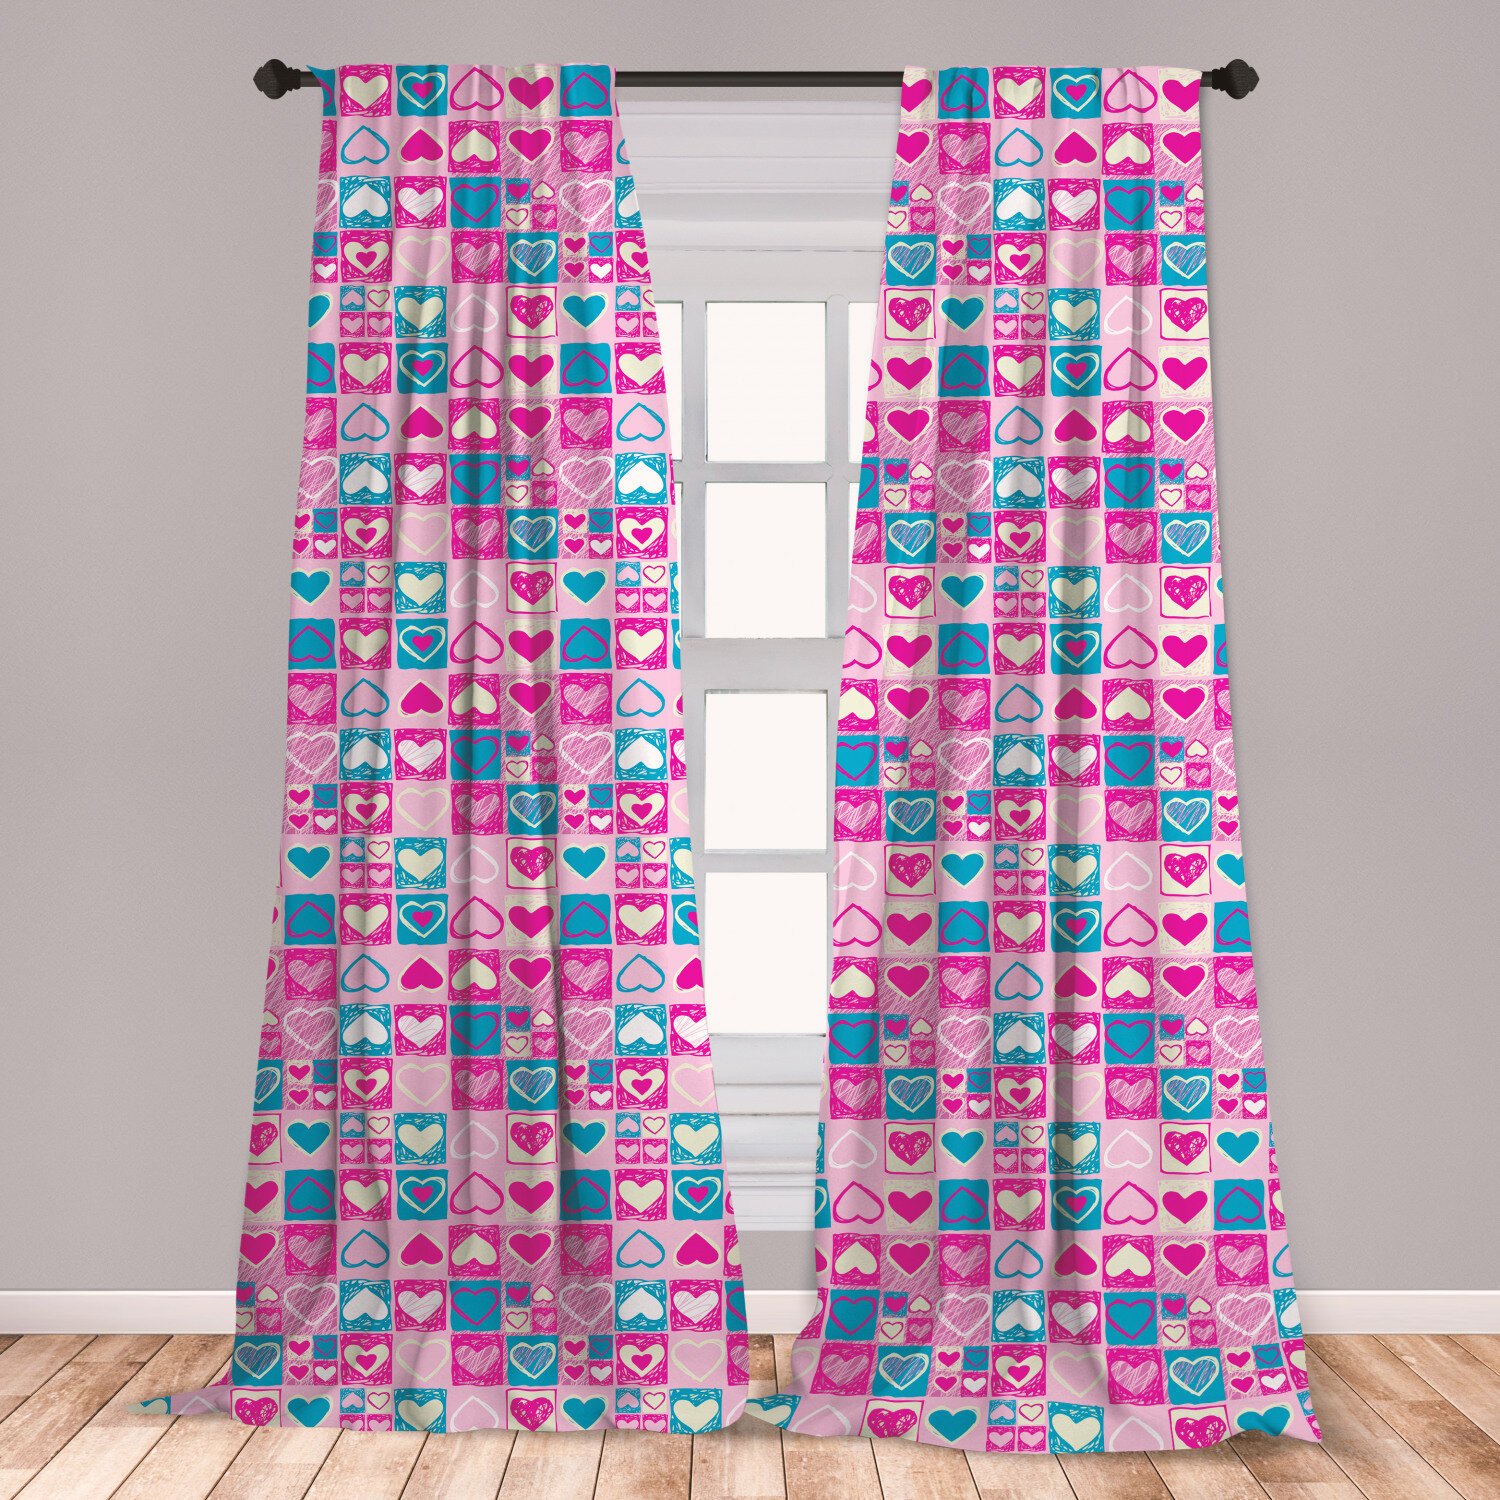 Curtains for Bedroom Windows with Designs Awesome Ambesonne Love 2 Panel Curtain Set Doodle Sketchy Hearts In Squares Childish Romance Girls Kids Design Lightweight Window Treatment Living Room